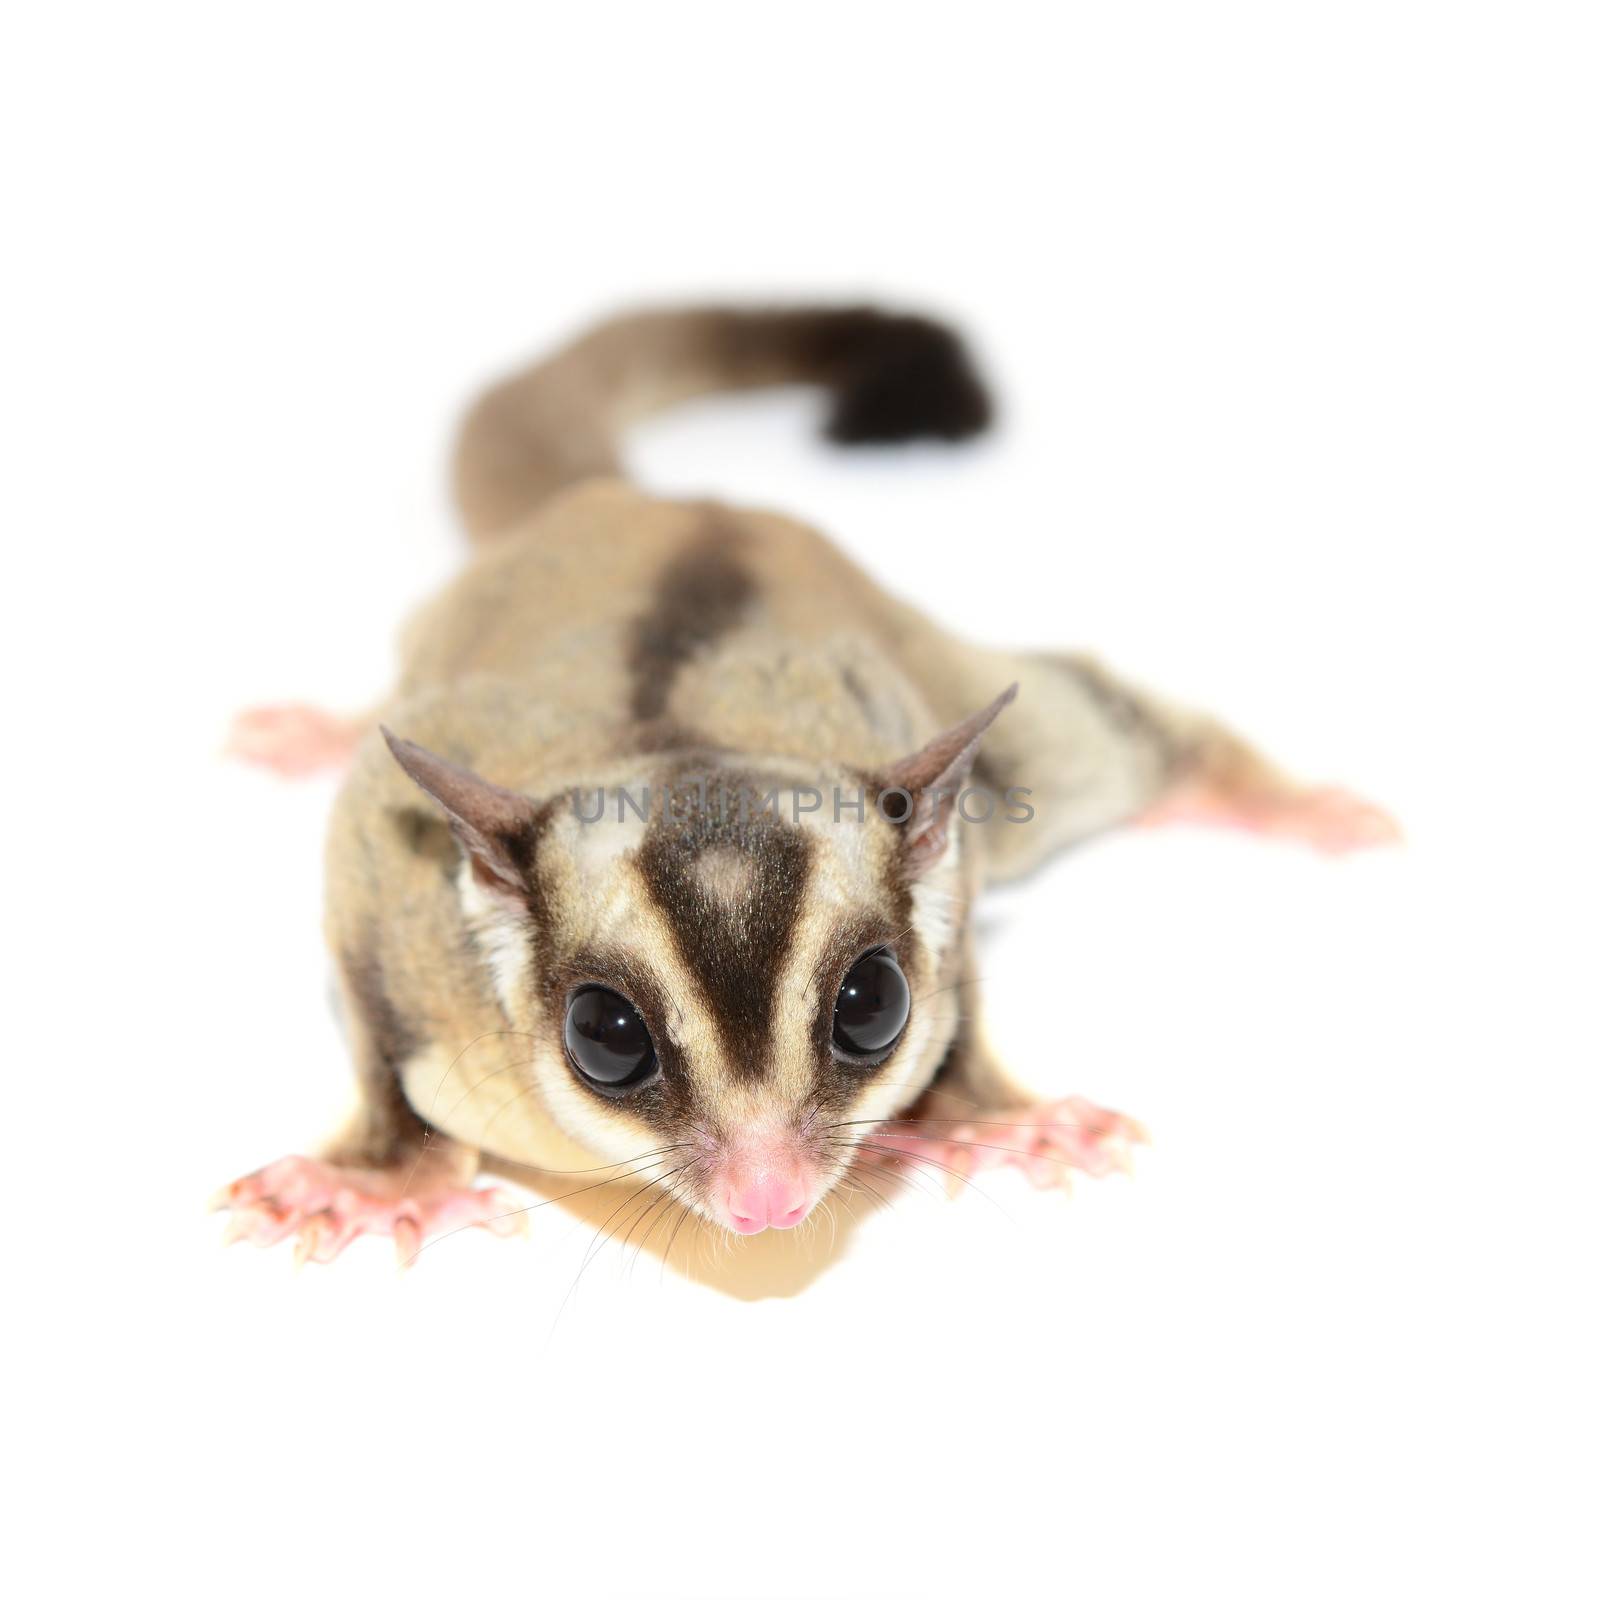 Sugarglider isolated on white